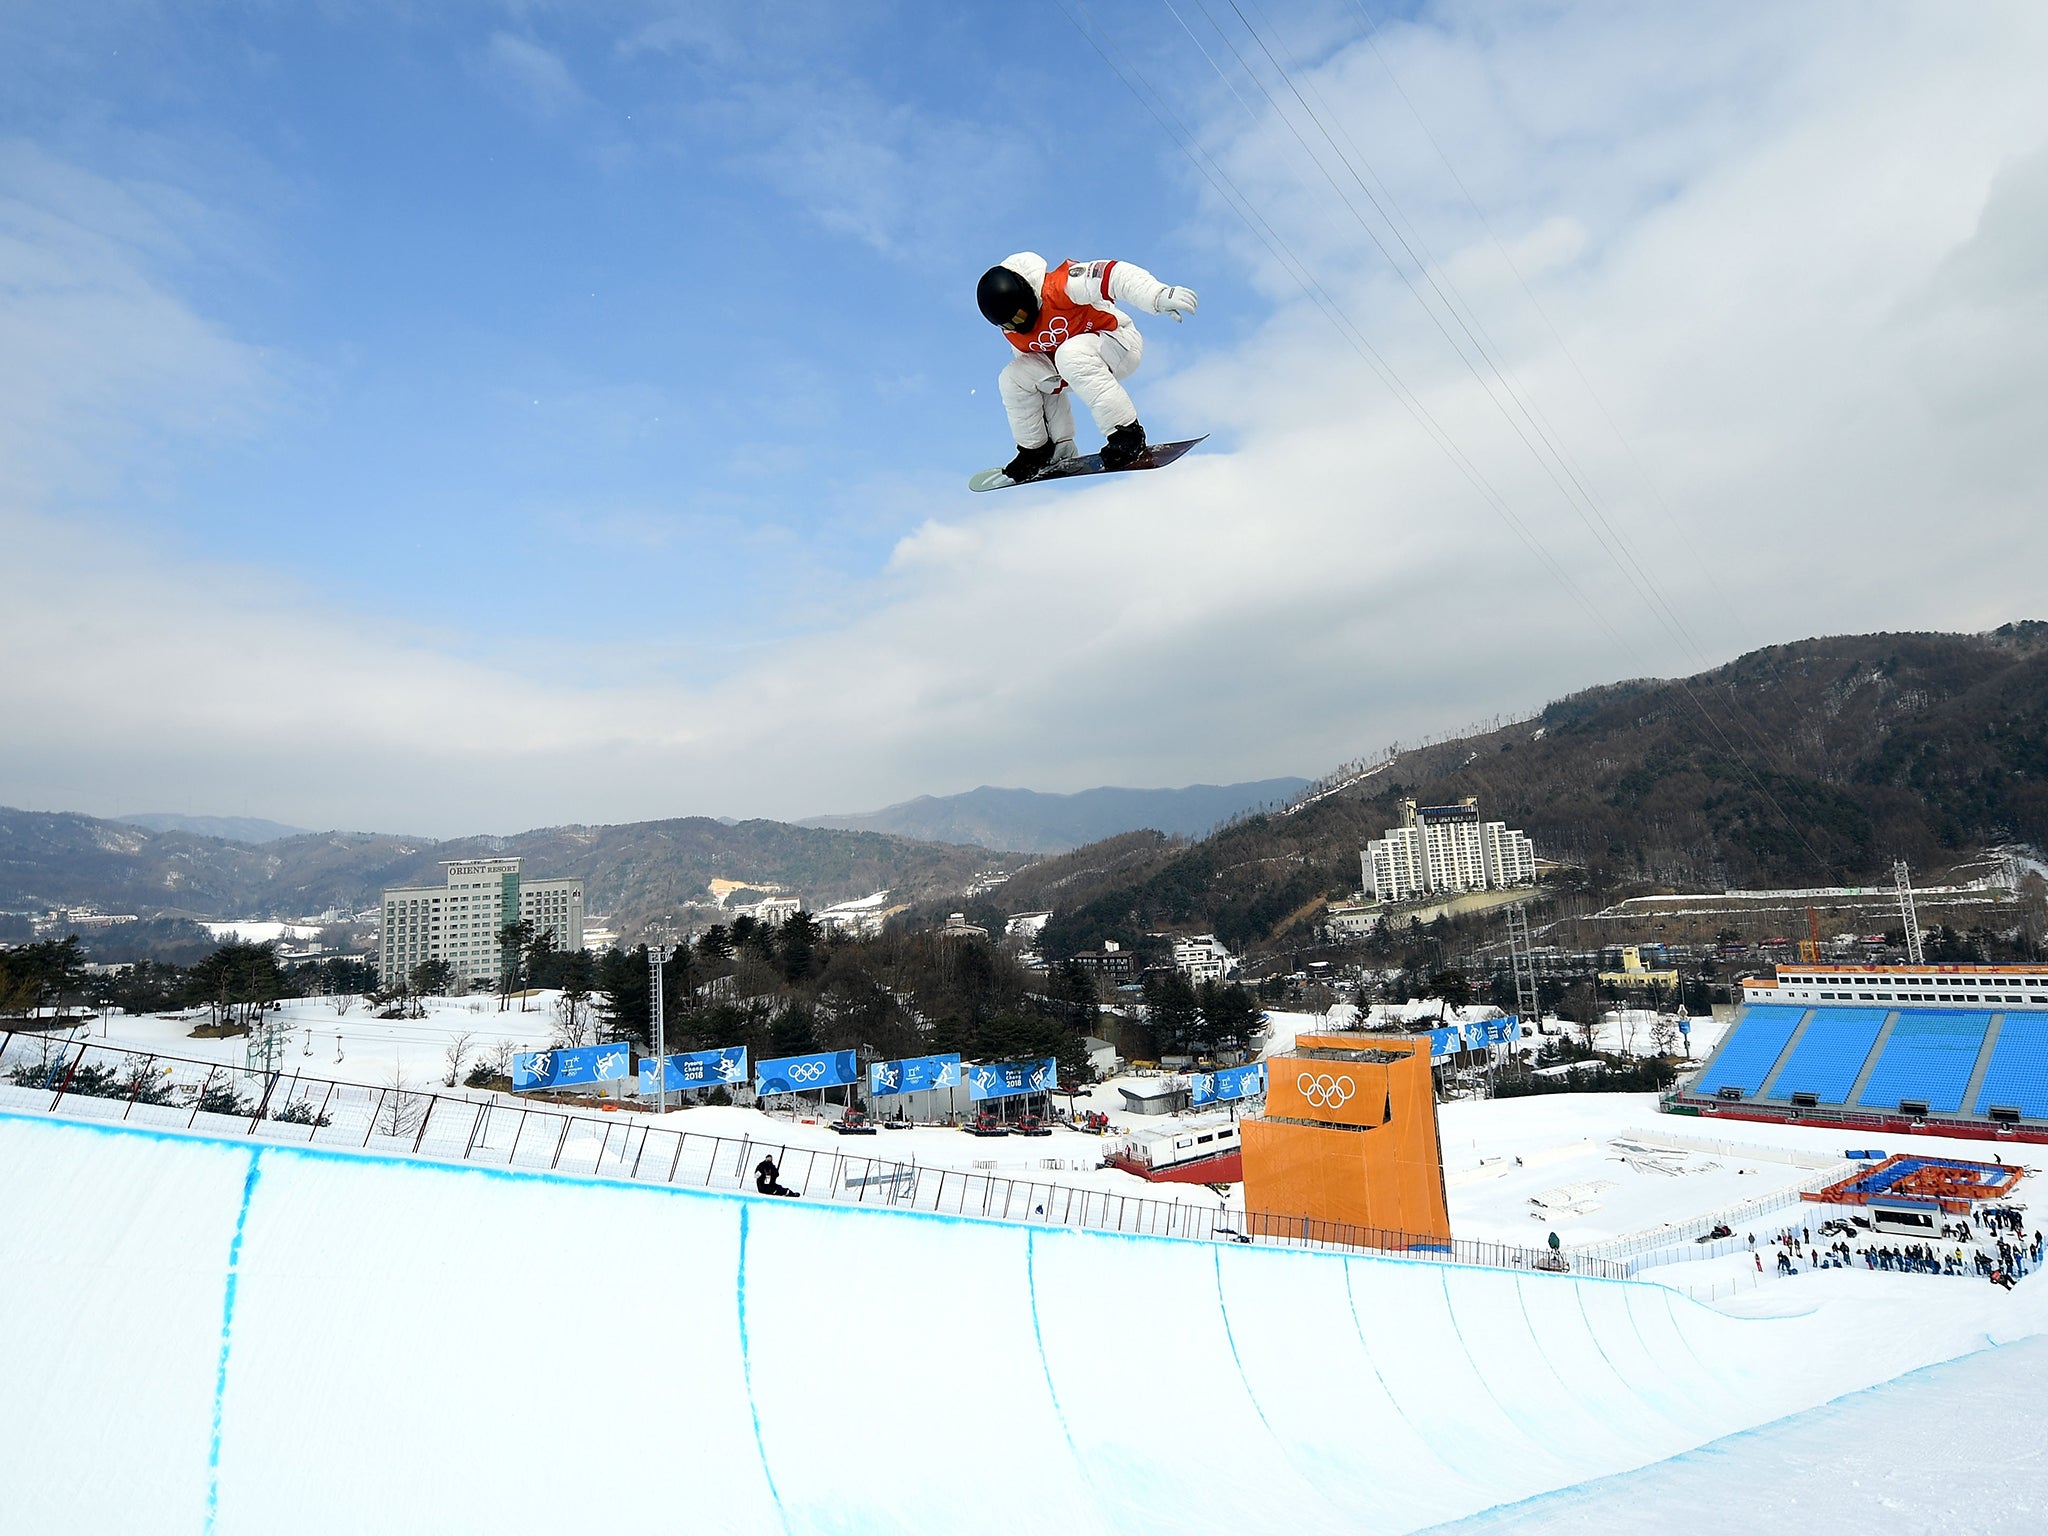 Shaun White is looking to win his third Winter Olympics gold medal after losing out in 2014